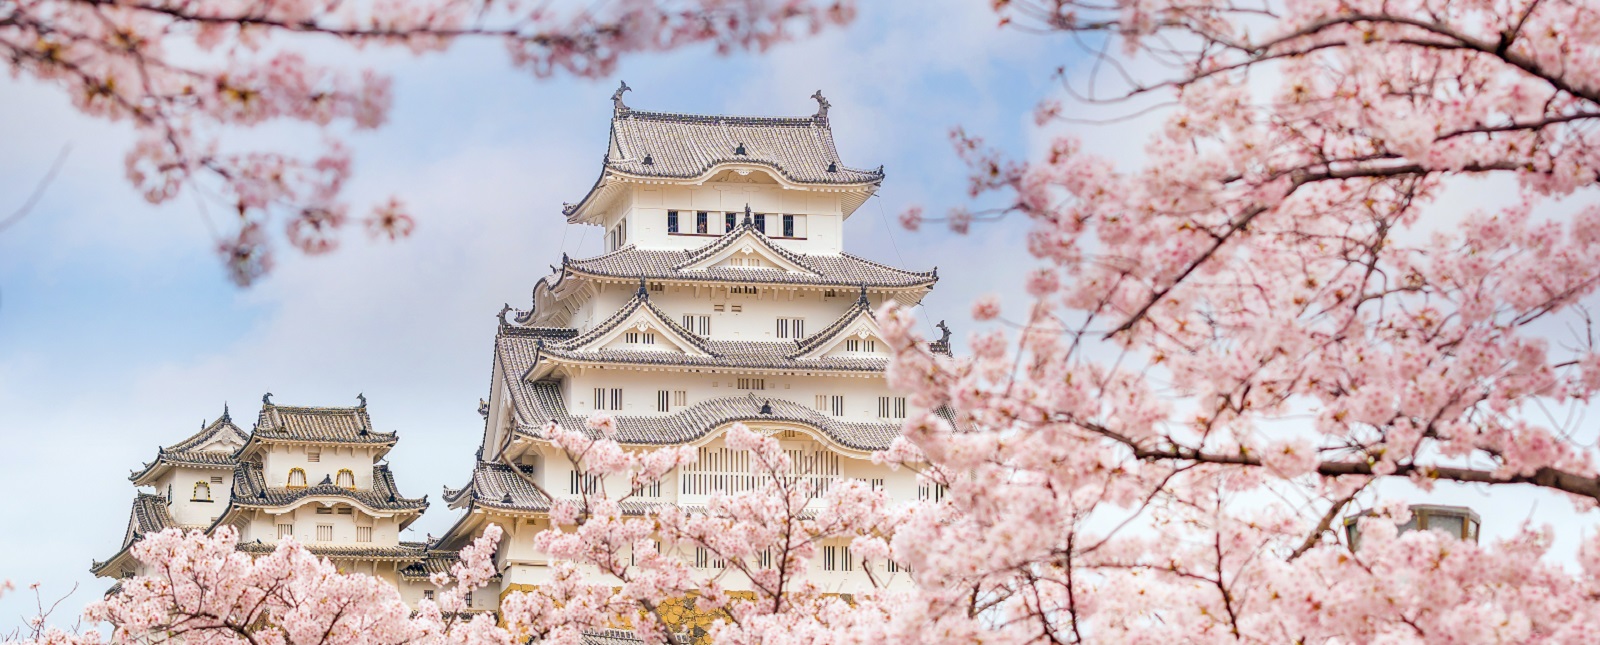 Cherry Blossom Festival In Japan When And Where Go,How To Update Your House On Zillow